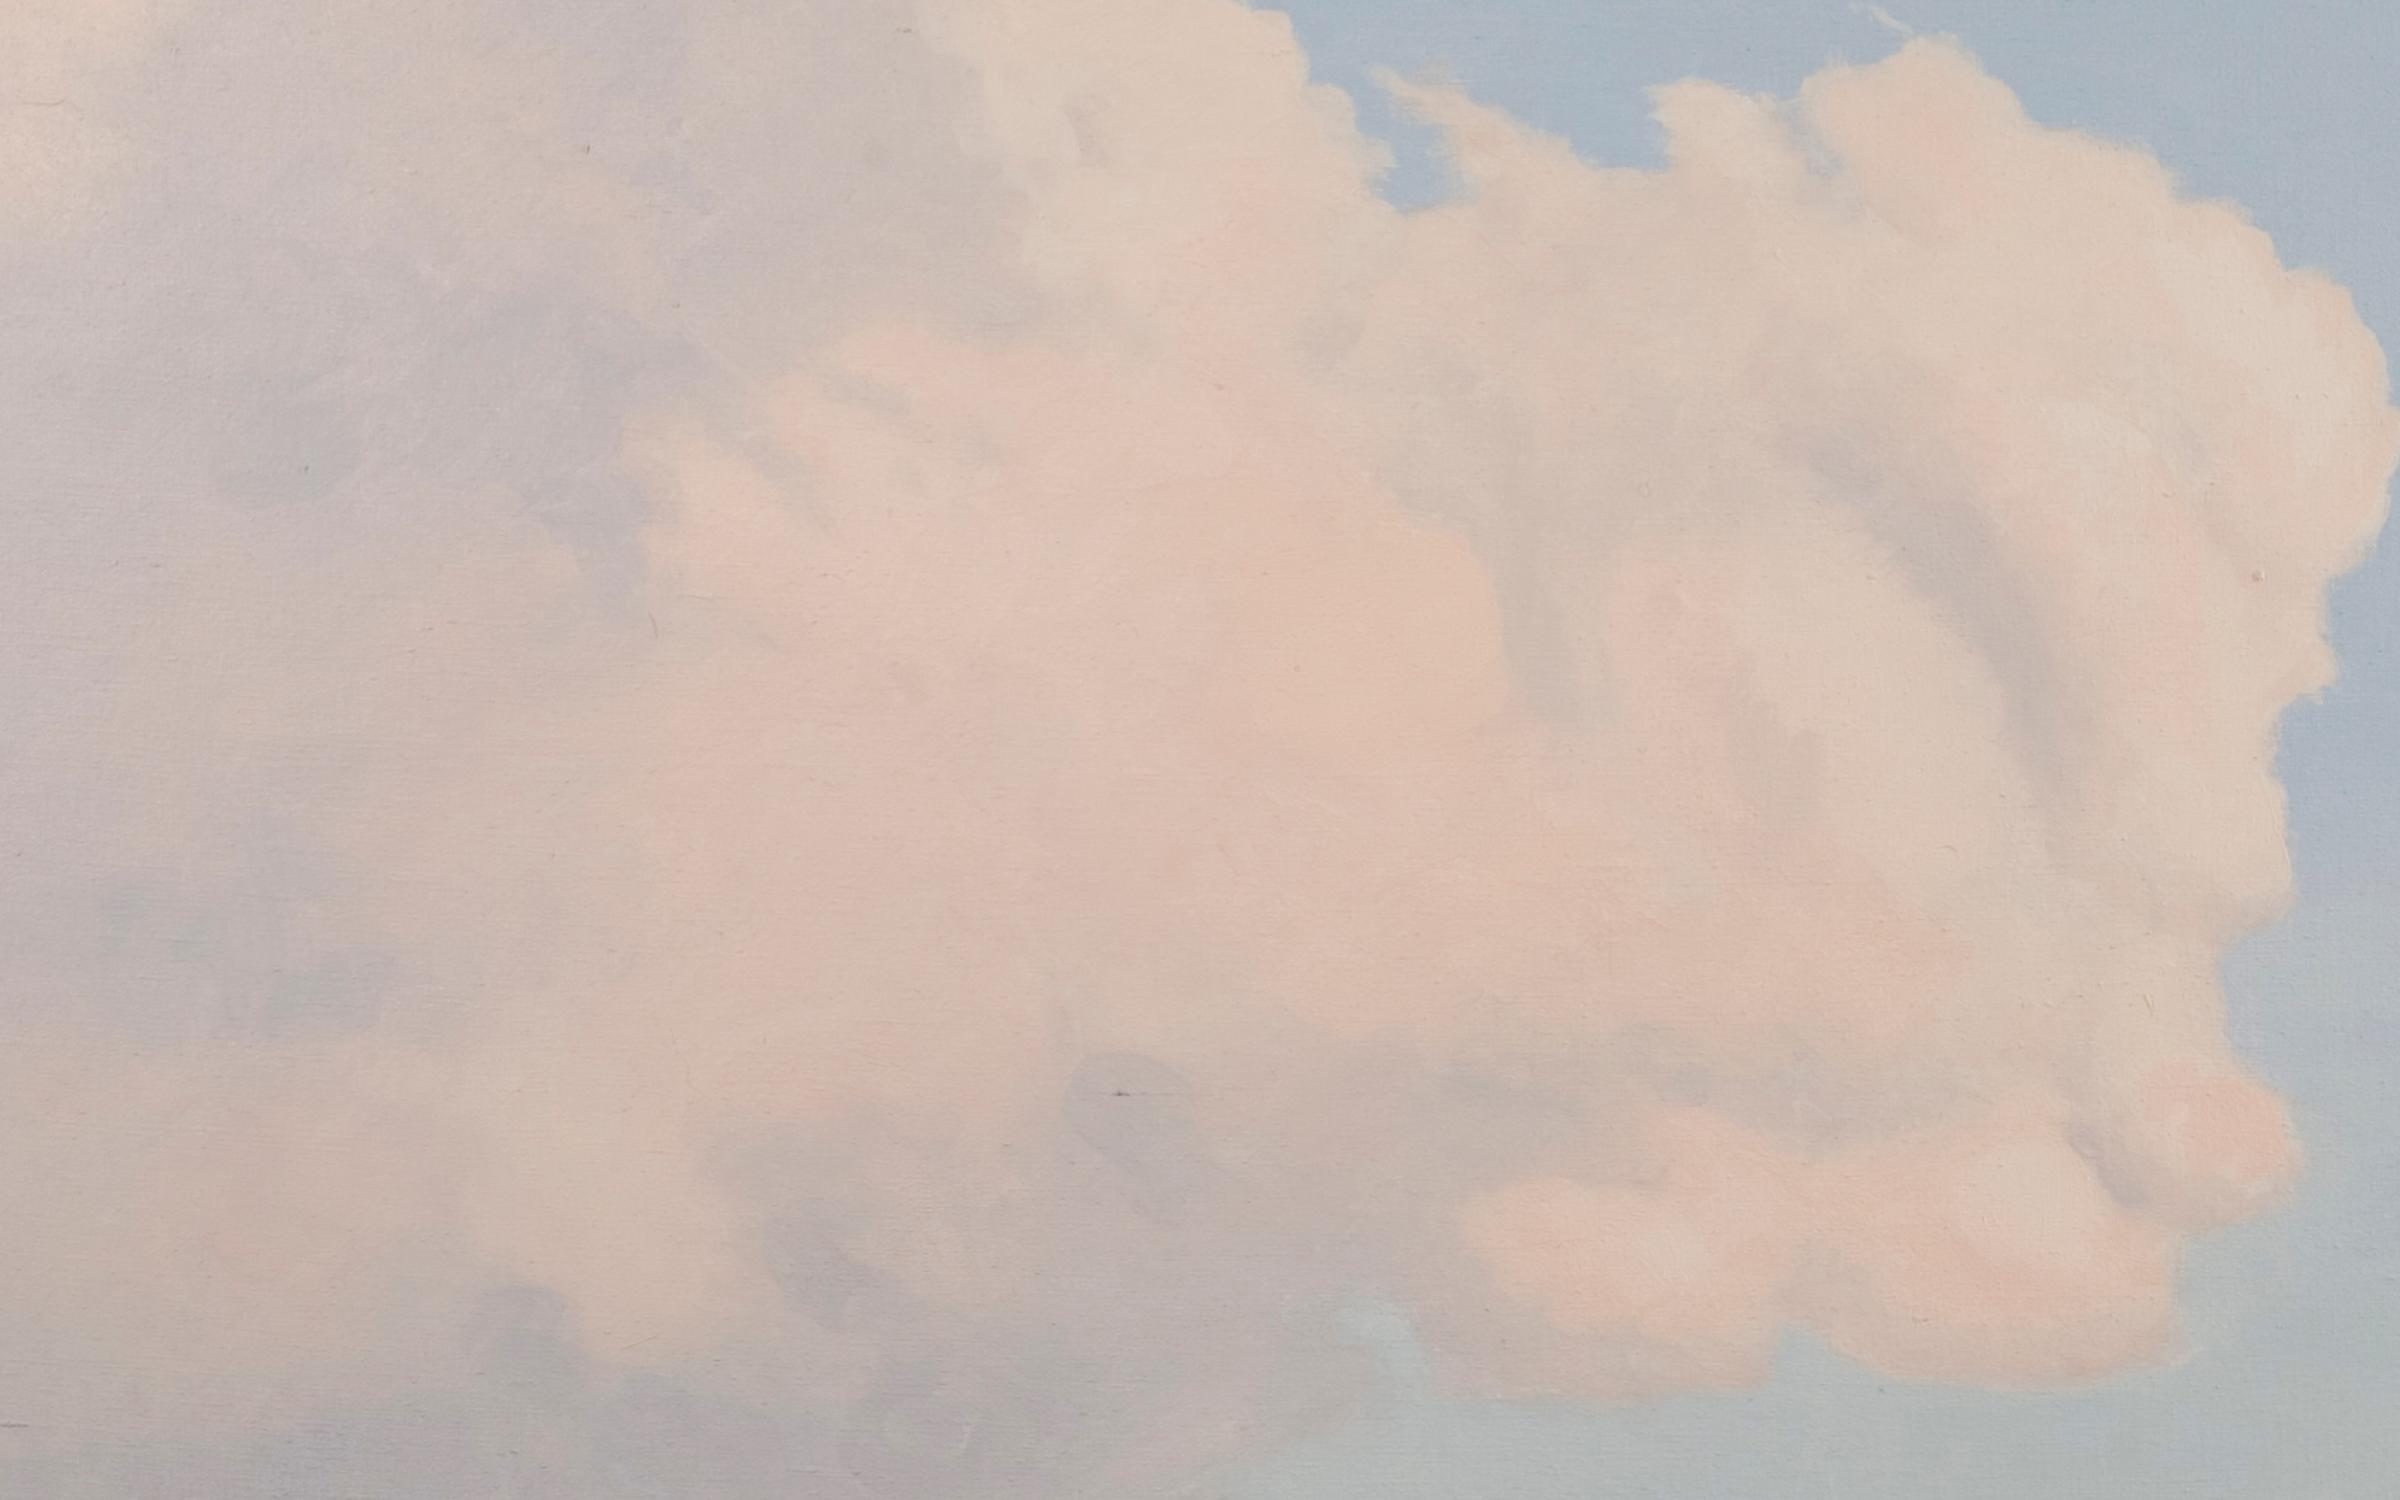 A off-white and pink close-up of a cloud on a blue background